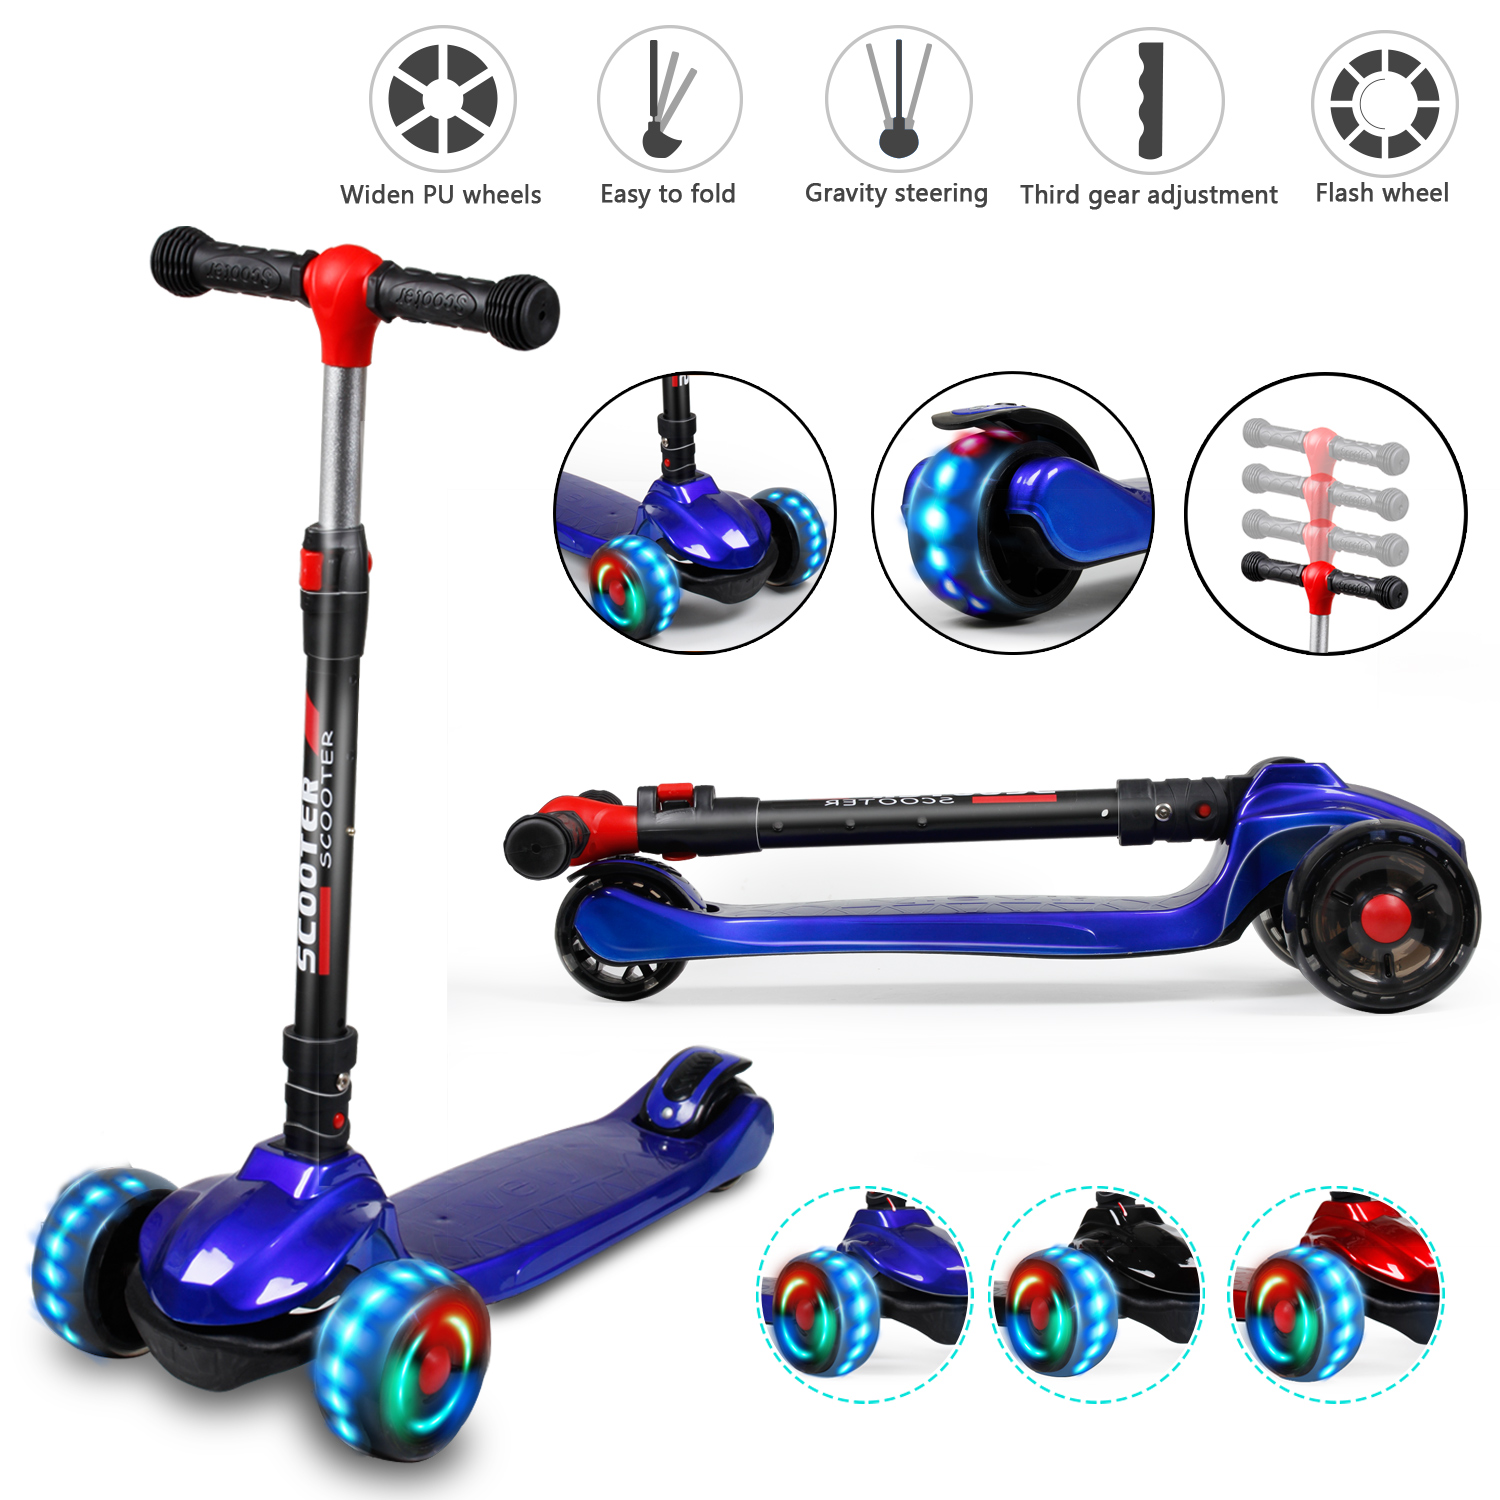 Kick Scooter Deluxe for Toddler Adjustable Girls Boys Kids Toy Gift 3 LED Wheels